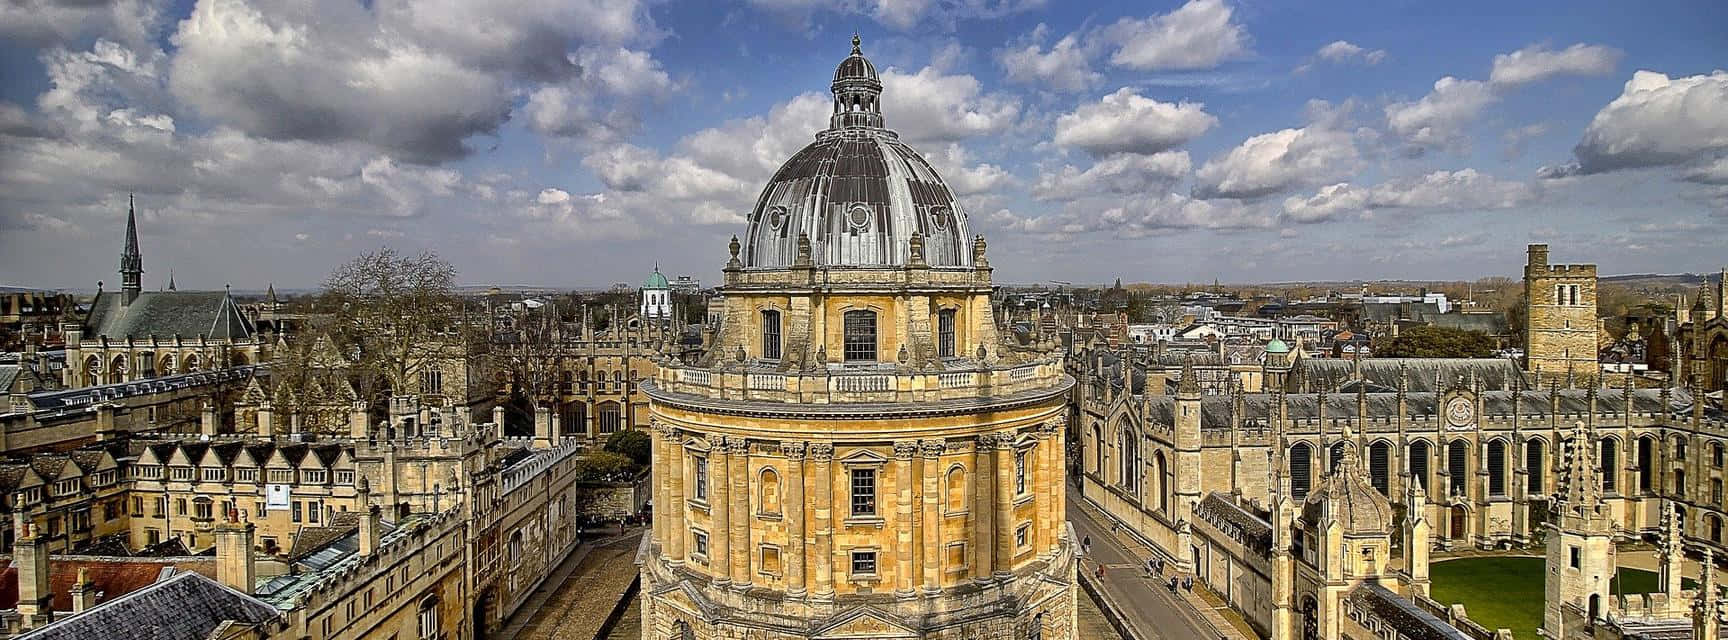 Oxford University Radcliffe Camera Aerial View Wallpaper